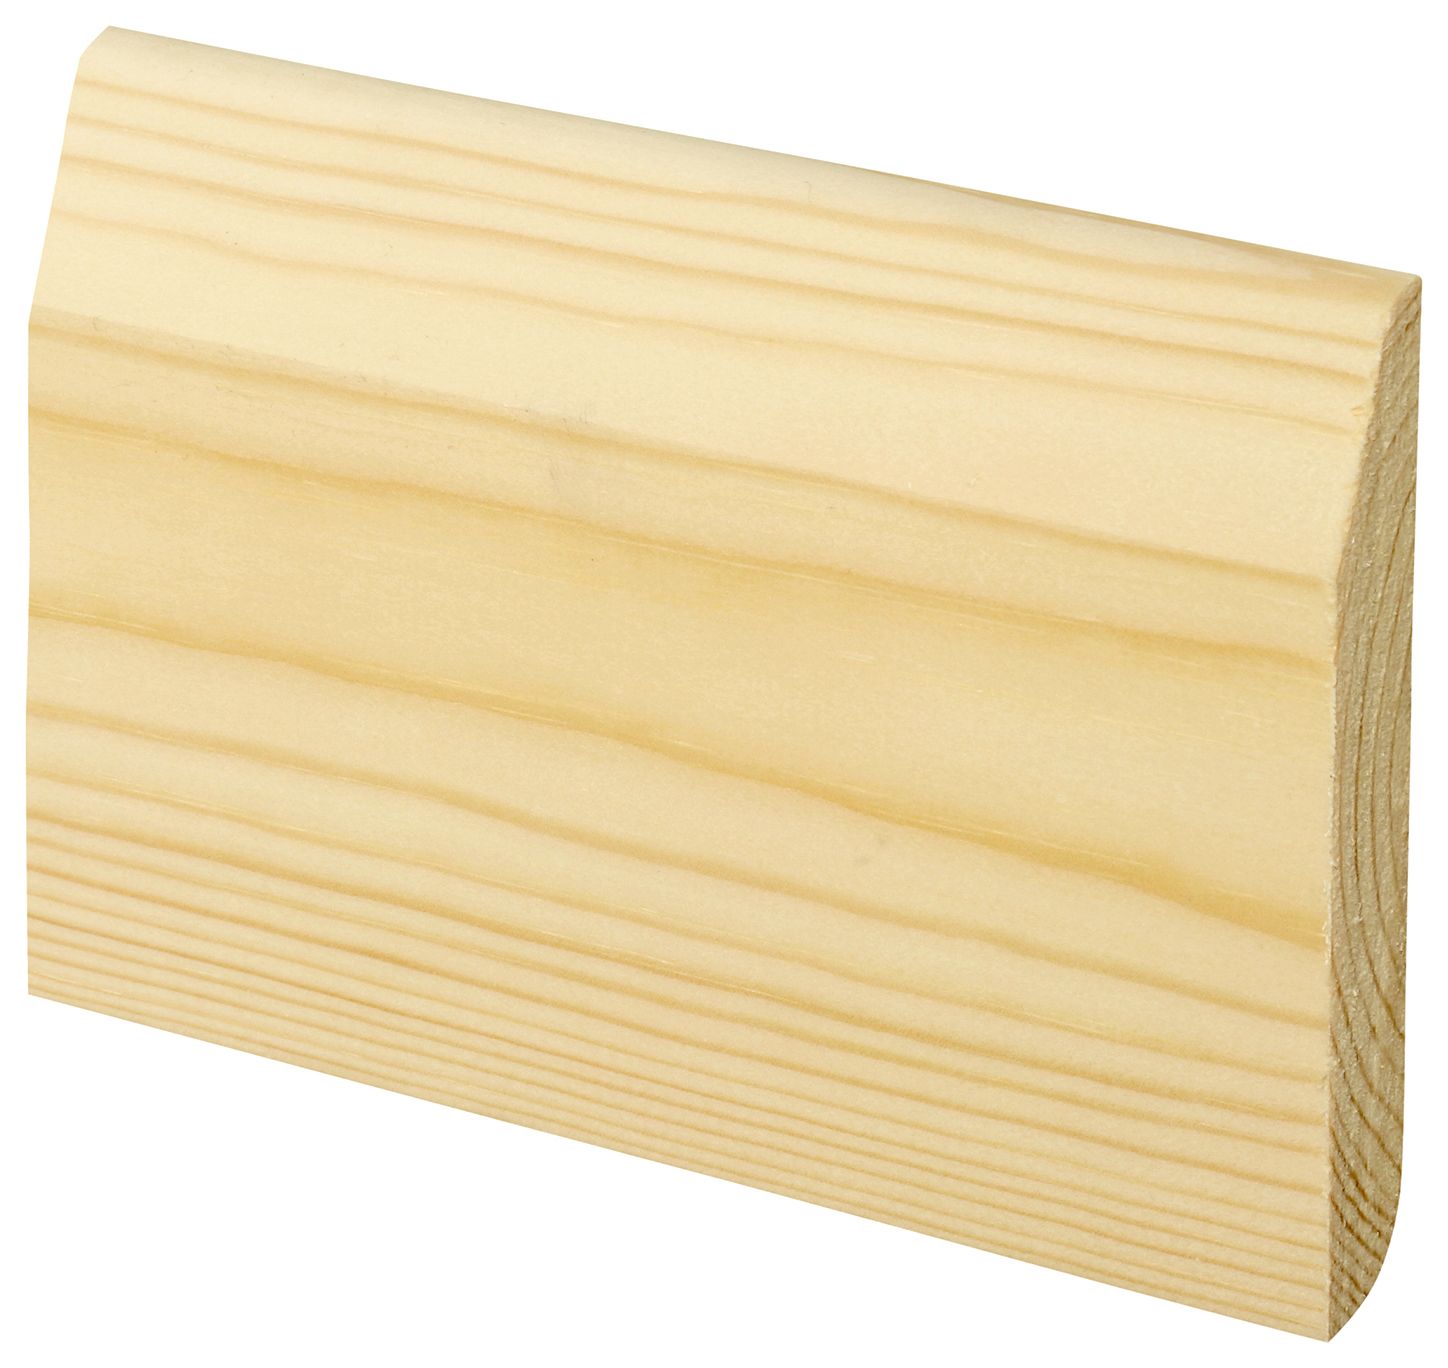 Image of Wickes Dual Purpose Chamfered/Bullnose Pine Skirting 15 x 95 x 3600 mm